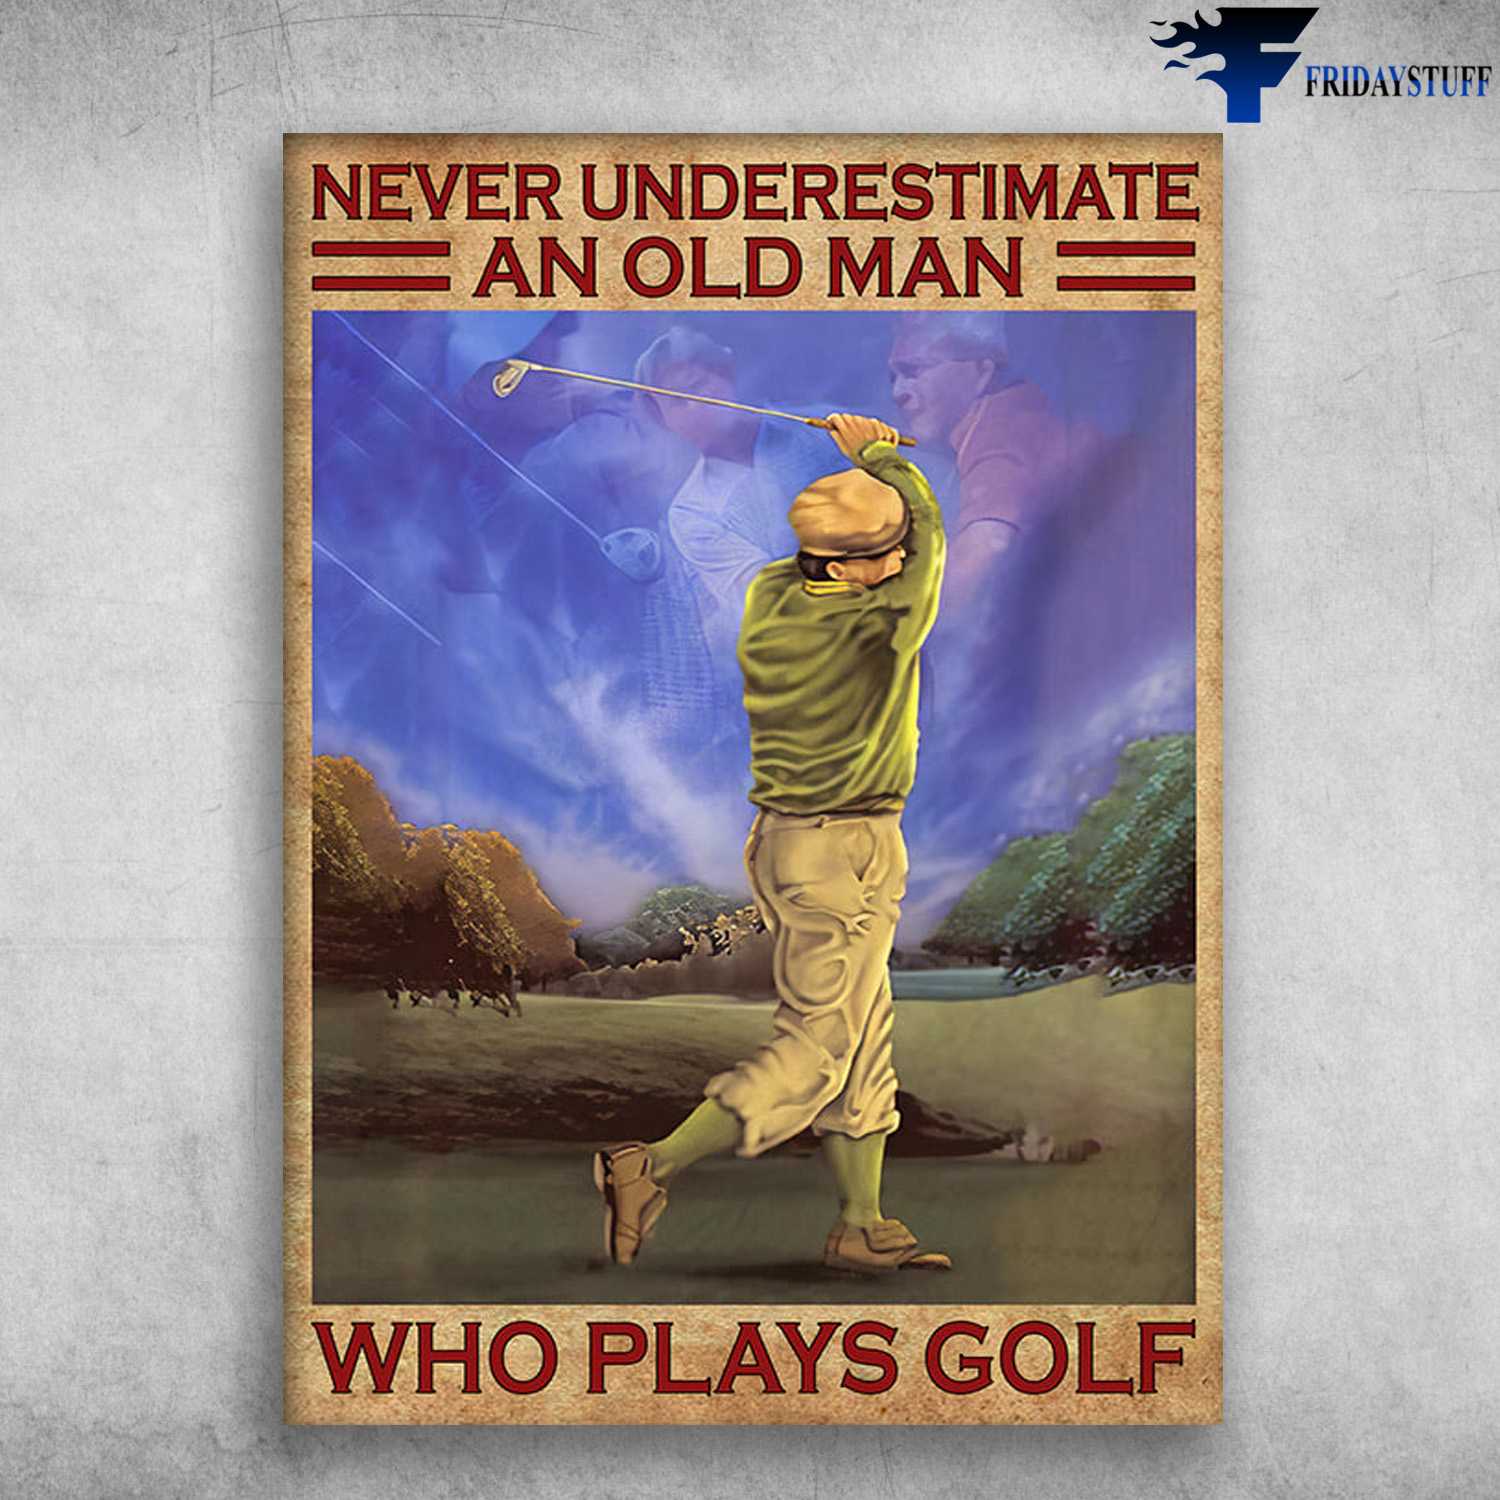 Golf Player, Golf Old Man, Never Underestimate An Old Man, Who Plays Golf